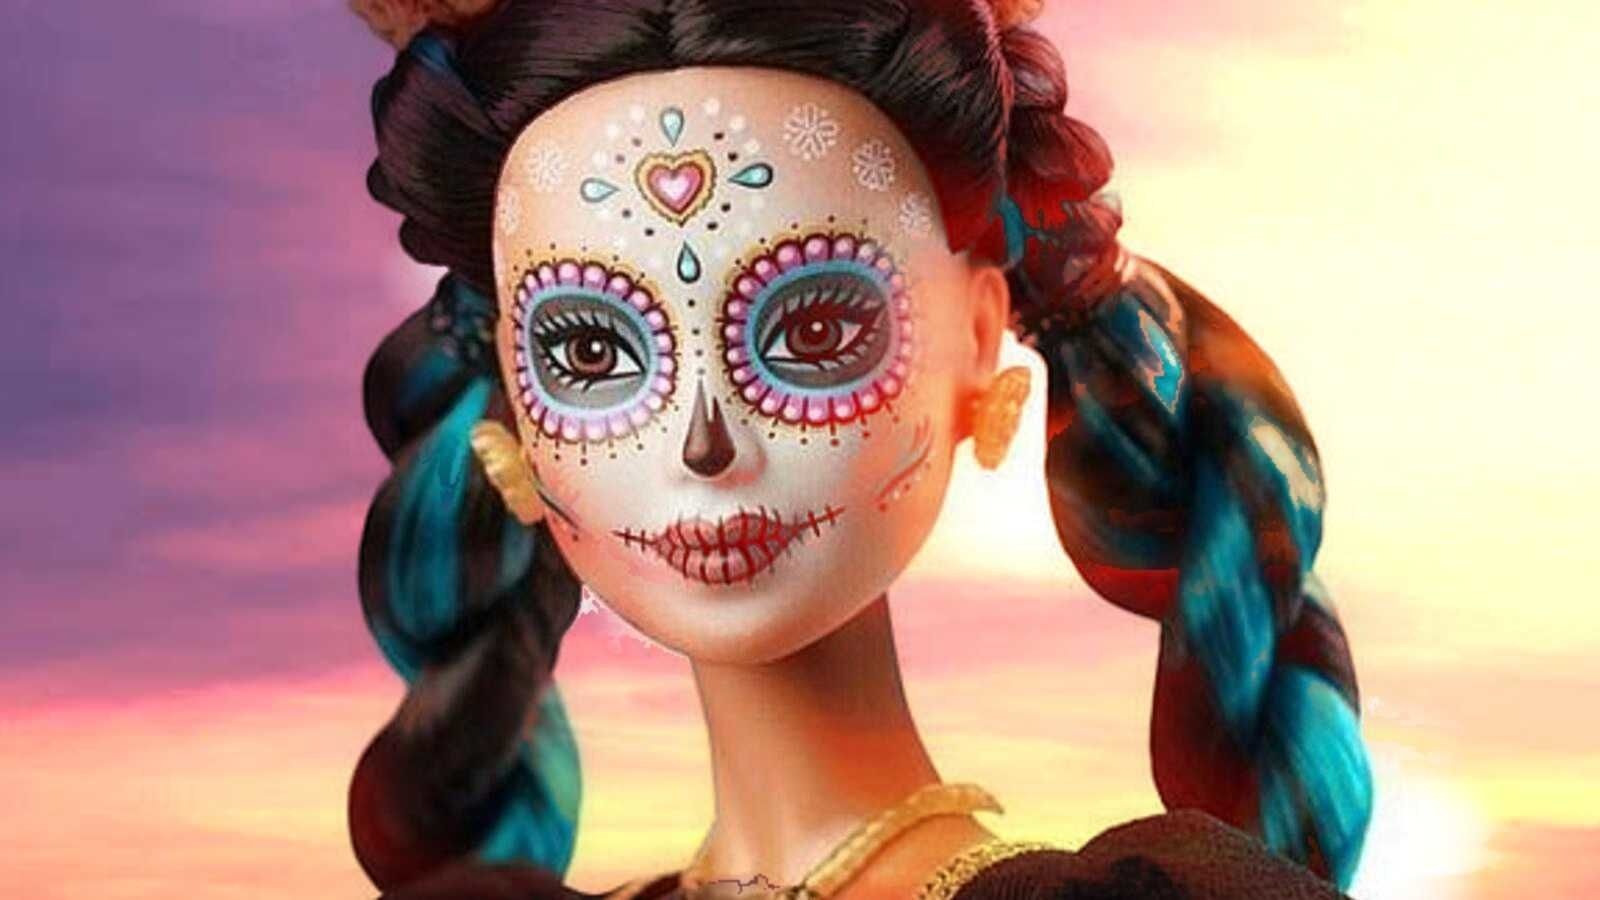 barbie day of the dead 2019 pre order